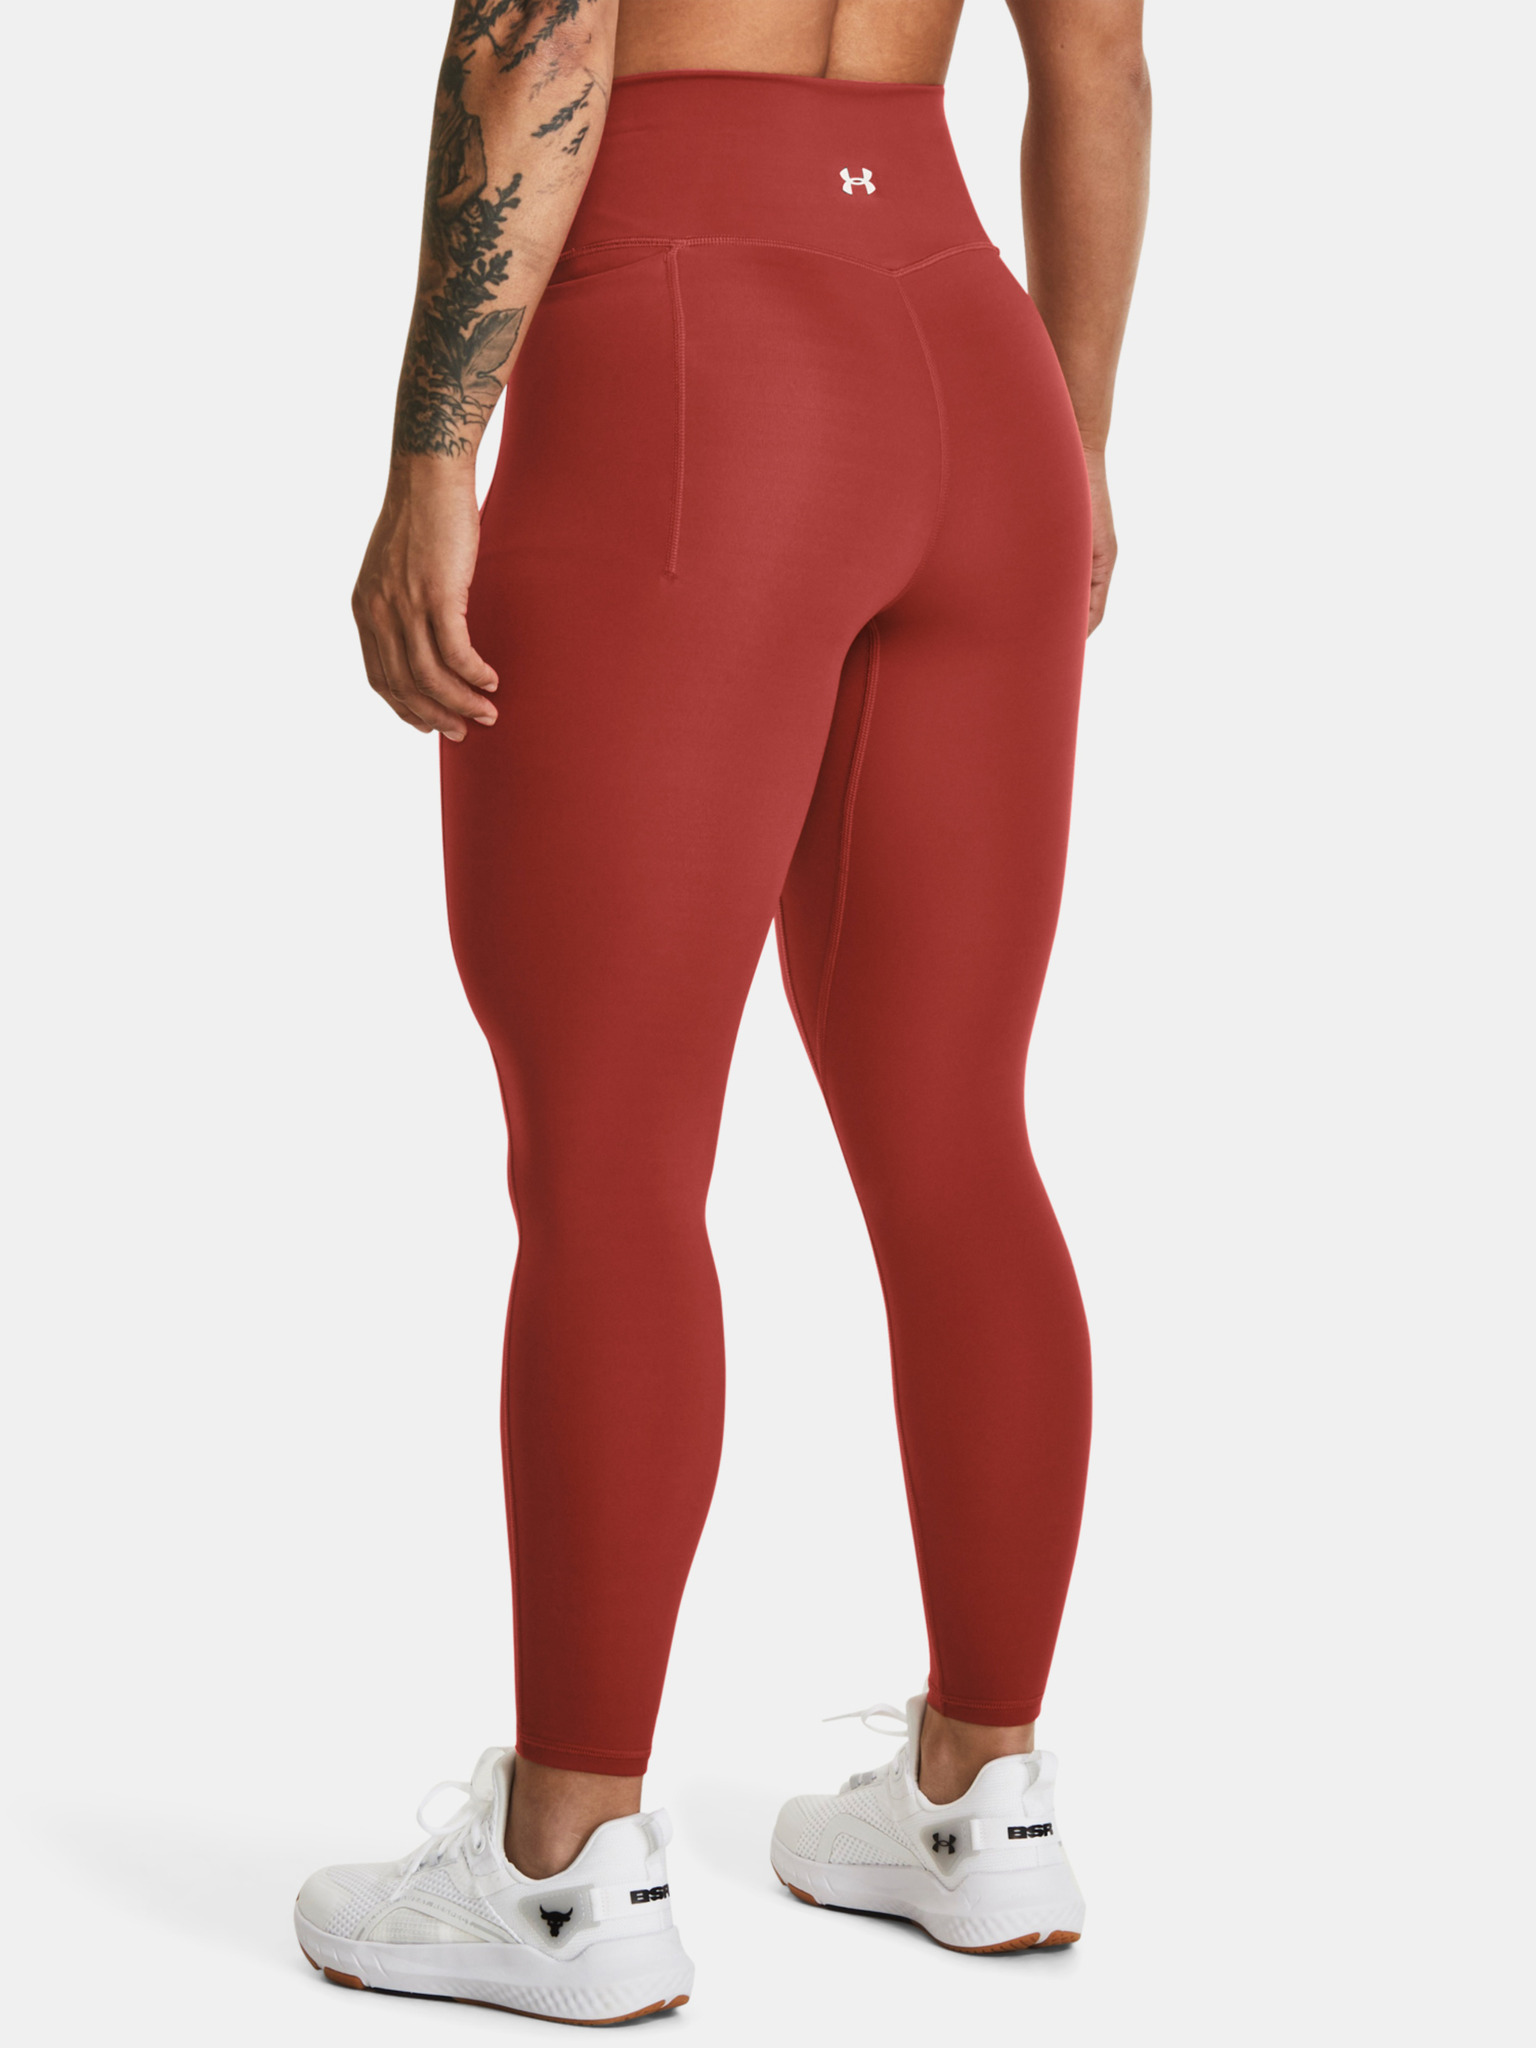 Under Armour Leggings Women YLG Youth Large Red HeatGear Rock Bull Fitted  Active